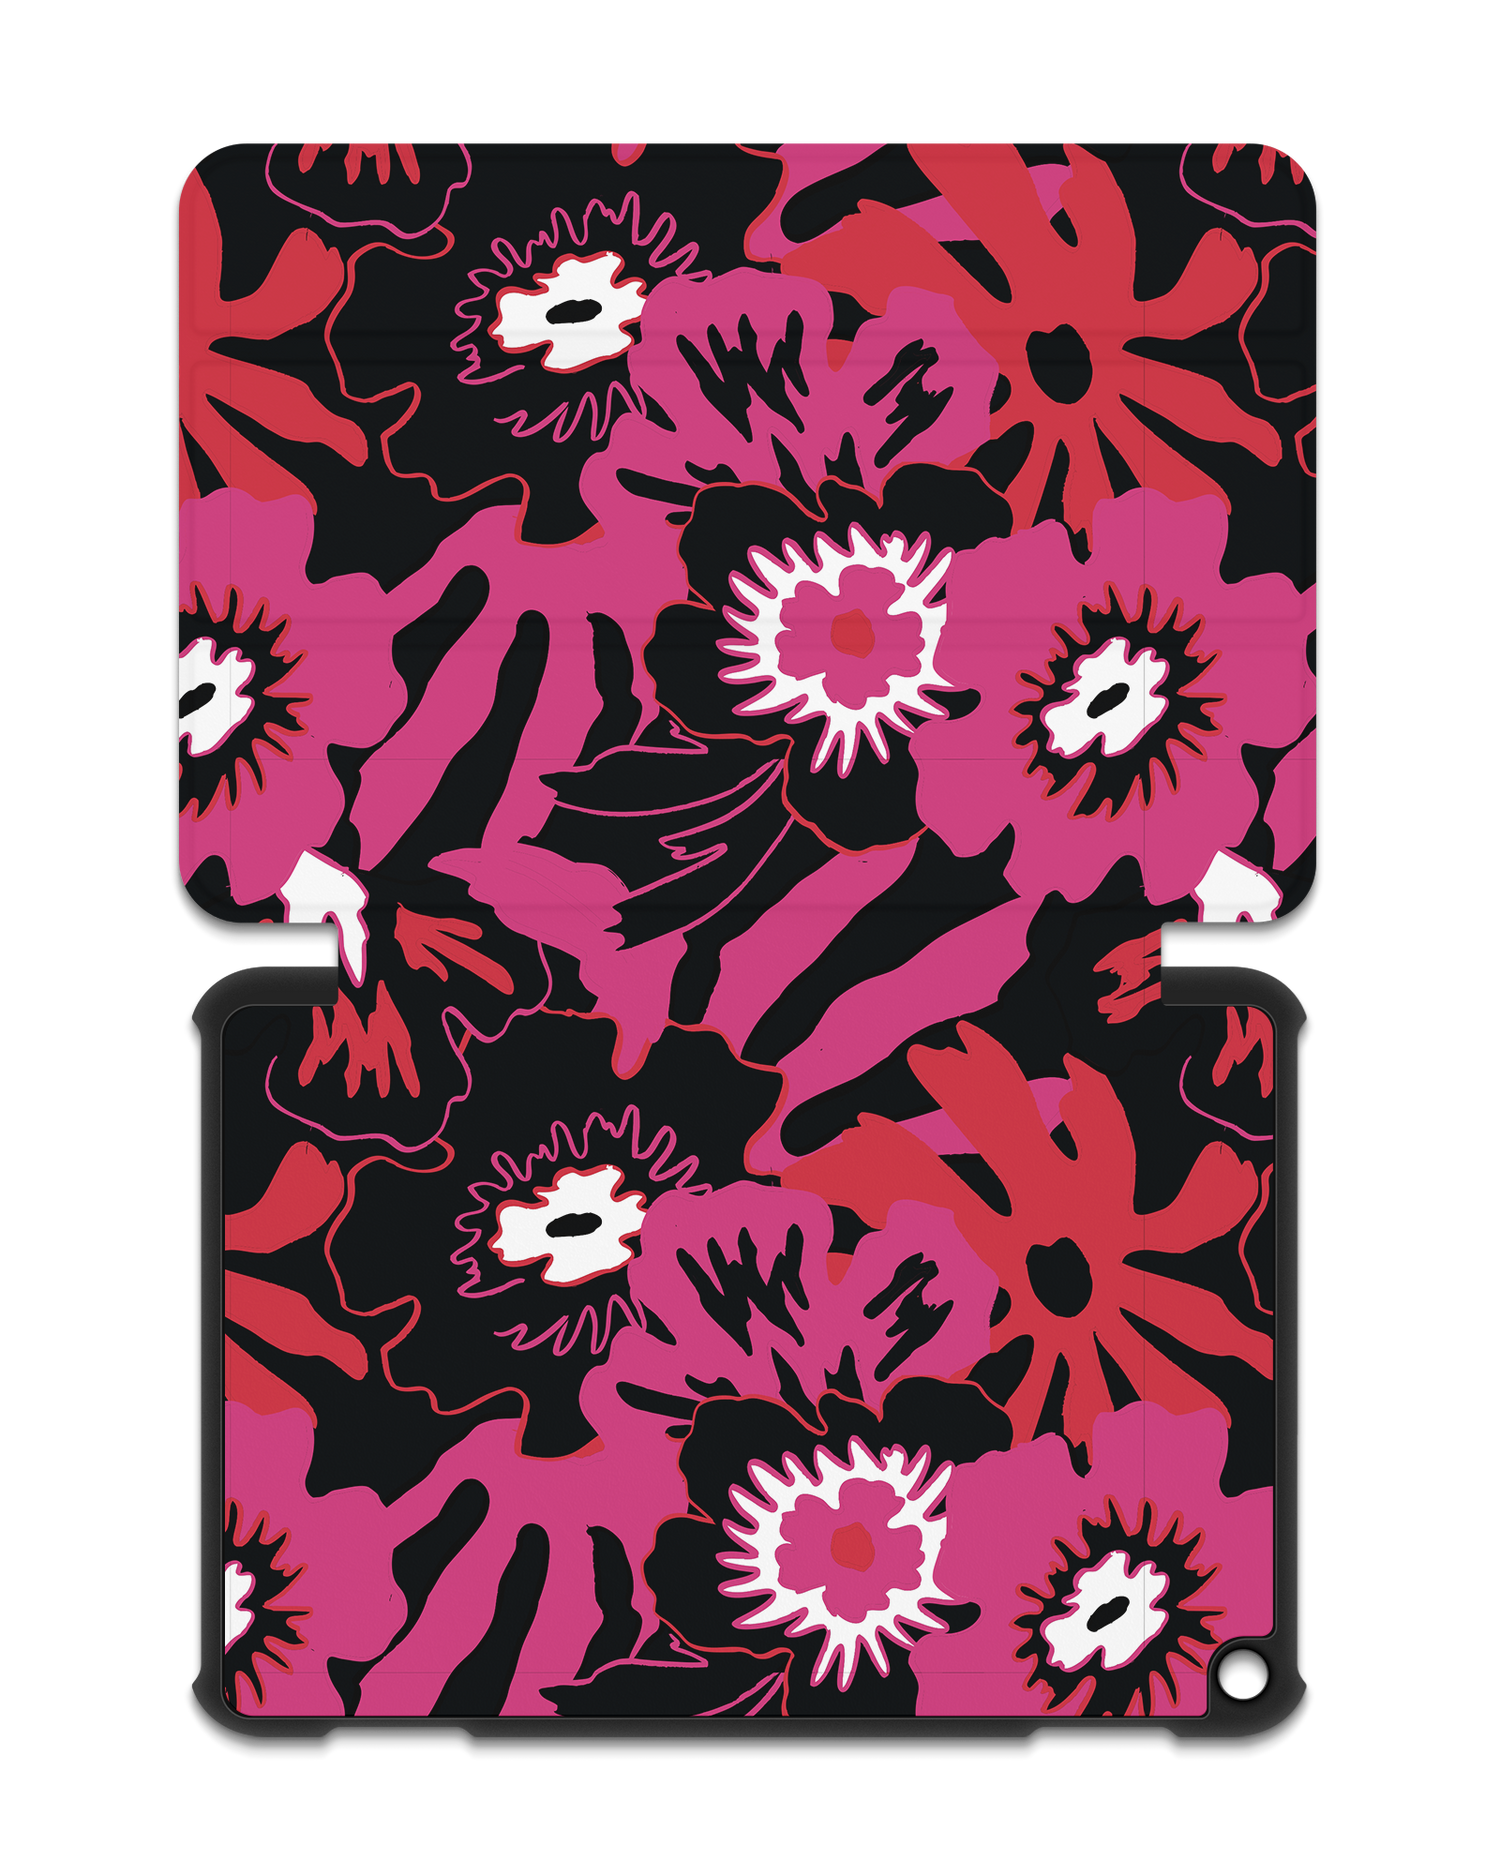 Flower Works Tablet Smart Case for Amazon Fire HD 8 (2022), Amazon Fire HD 8 Plus (2022), Amazon Fire HD 8 (2020), Amazon Fire HD 8 Plus (2020): Opened